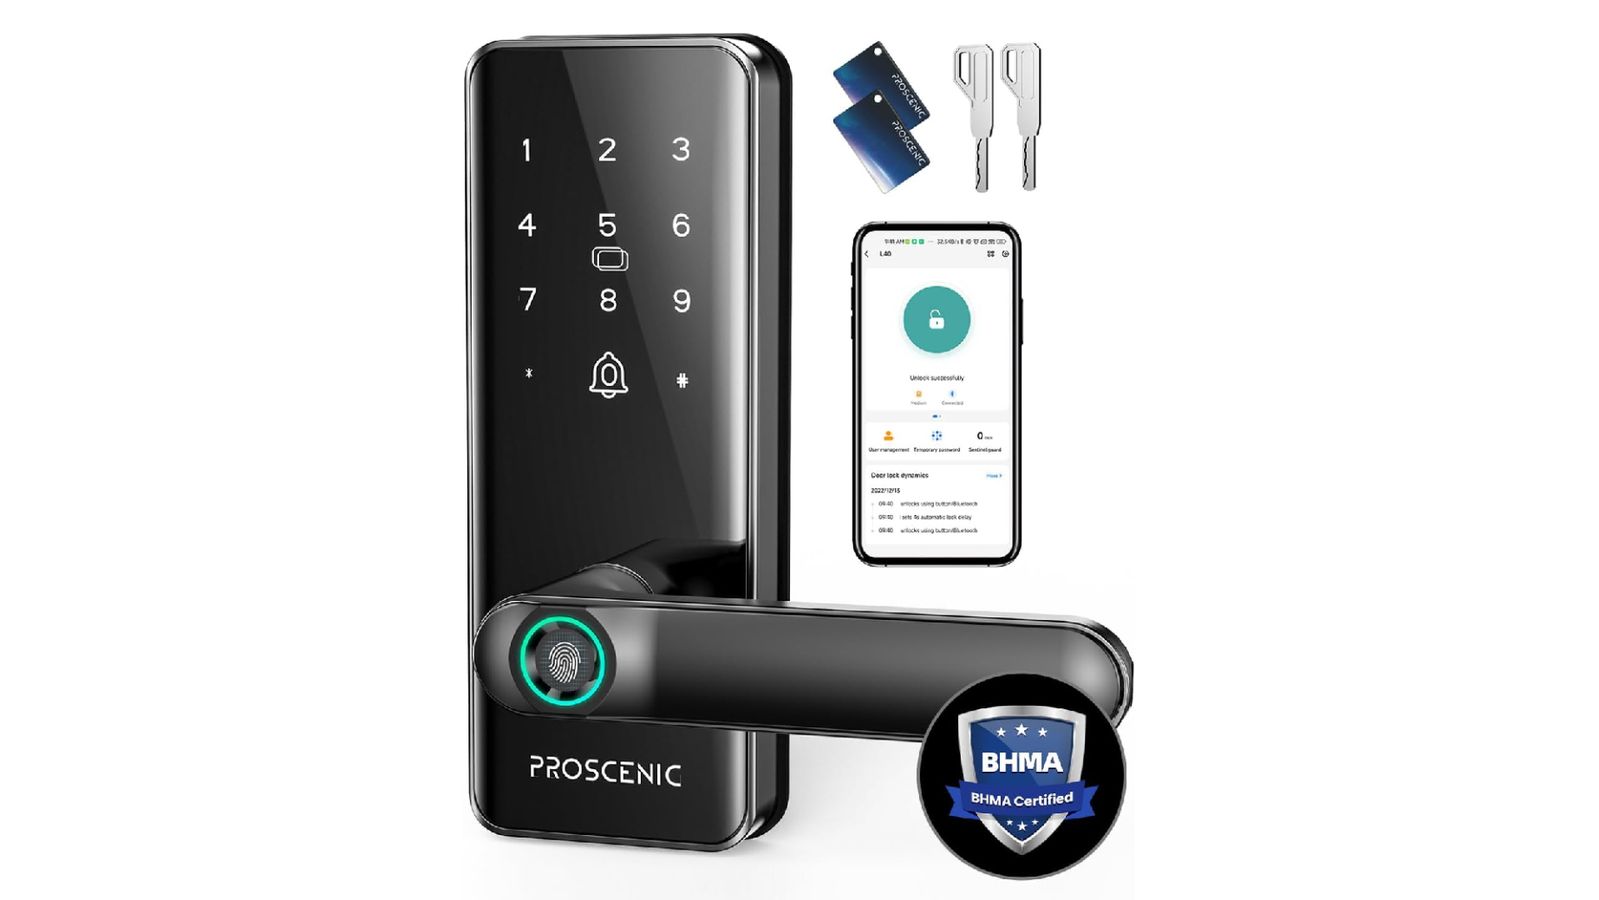 Prosenic Smart Lock product image of a digital black door handle featuring a number pad to enter.